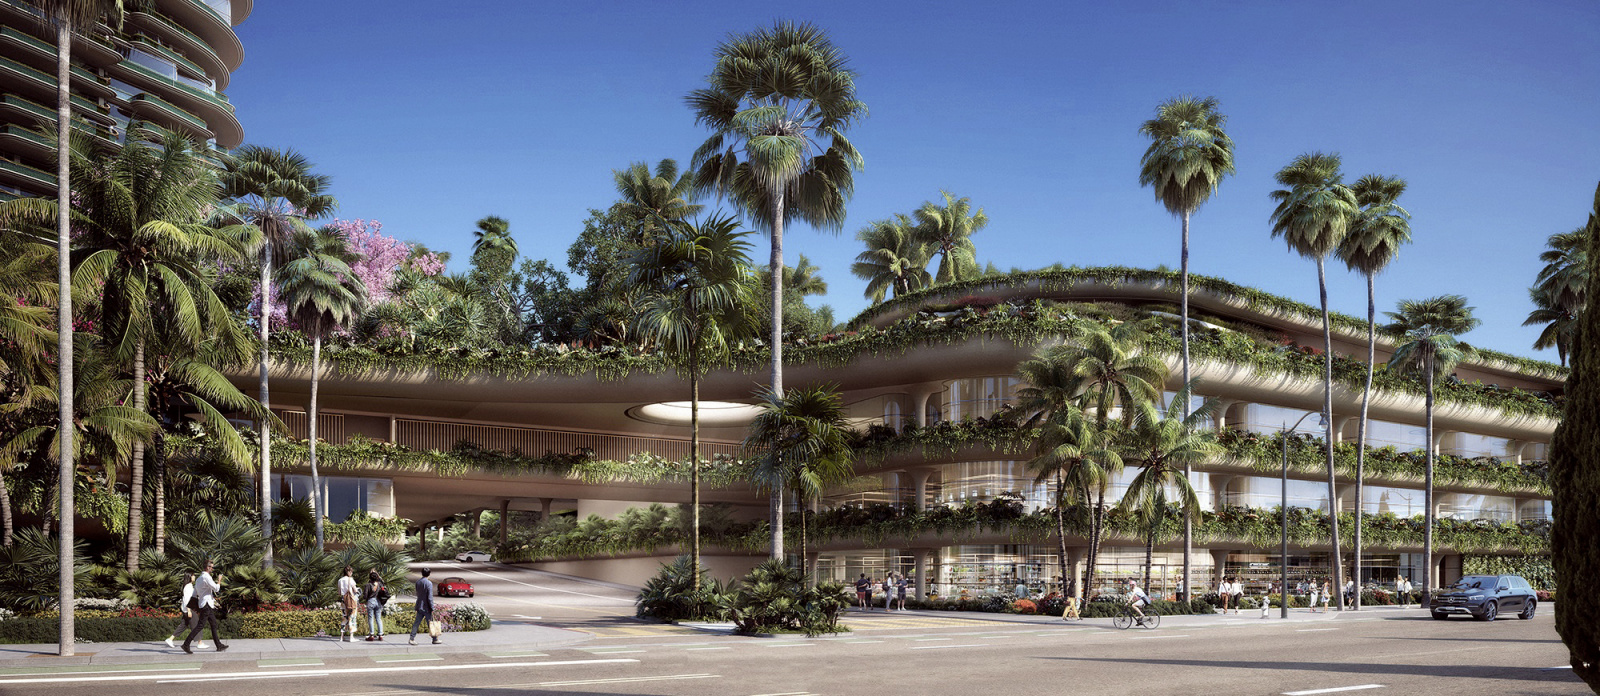 Beverly Hills voters to decide the fate of ultra-luxury LVMH hotel project